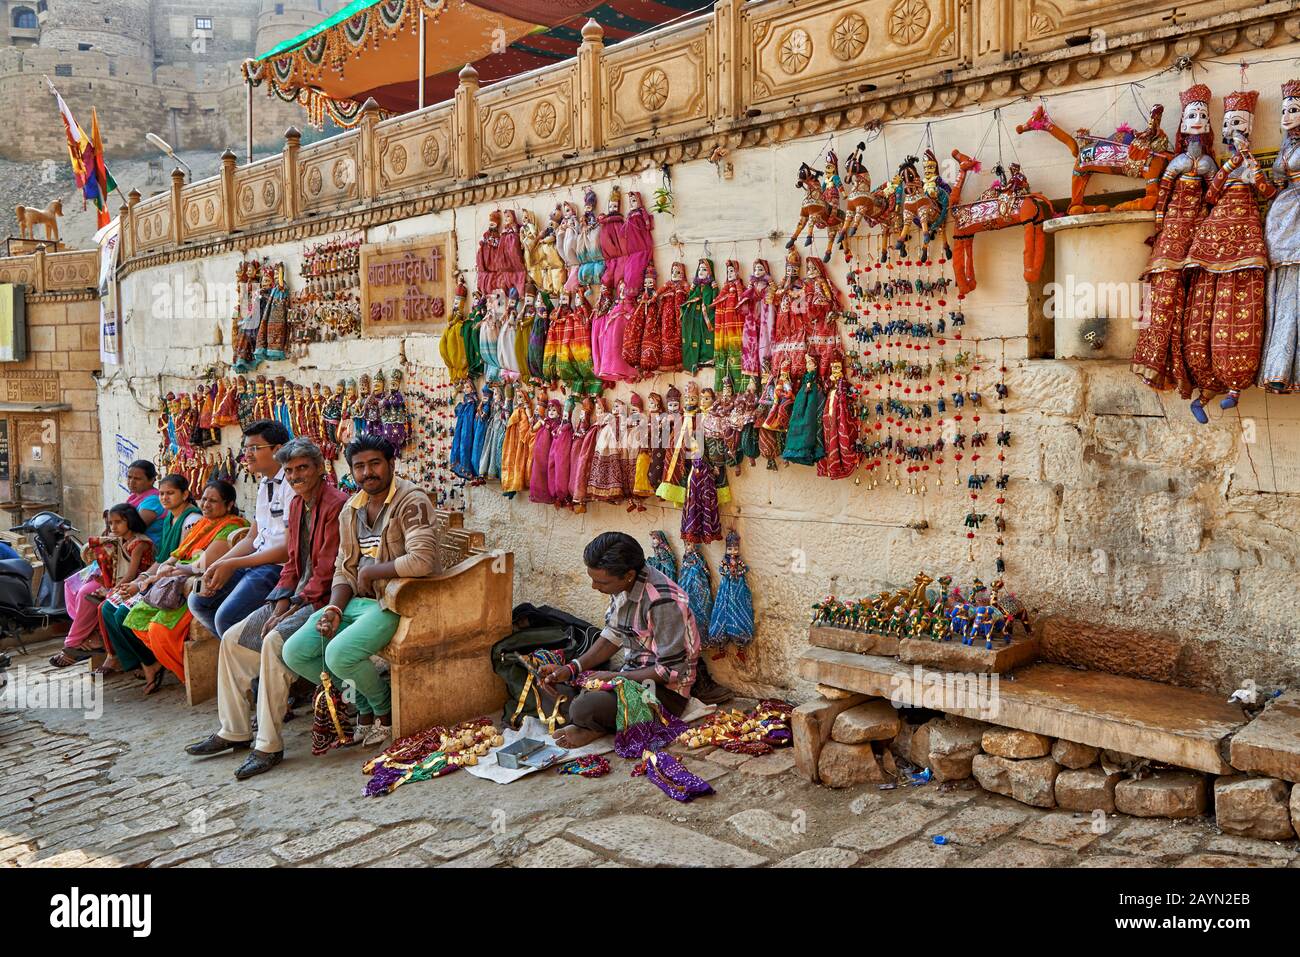 traditionally dressed women sell souvenirs in streets of Jaisalmer, Rajasthan, India Stock Photo